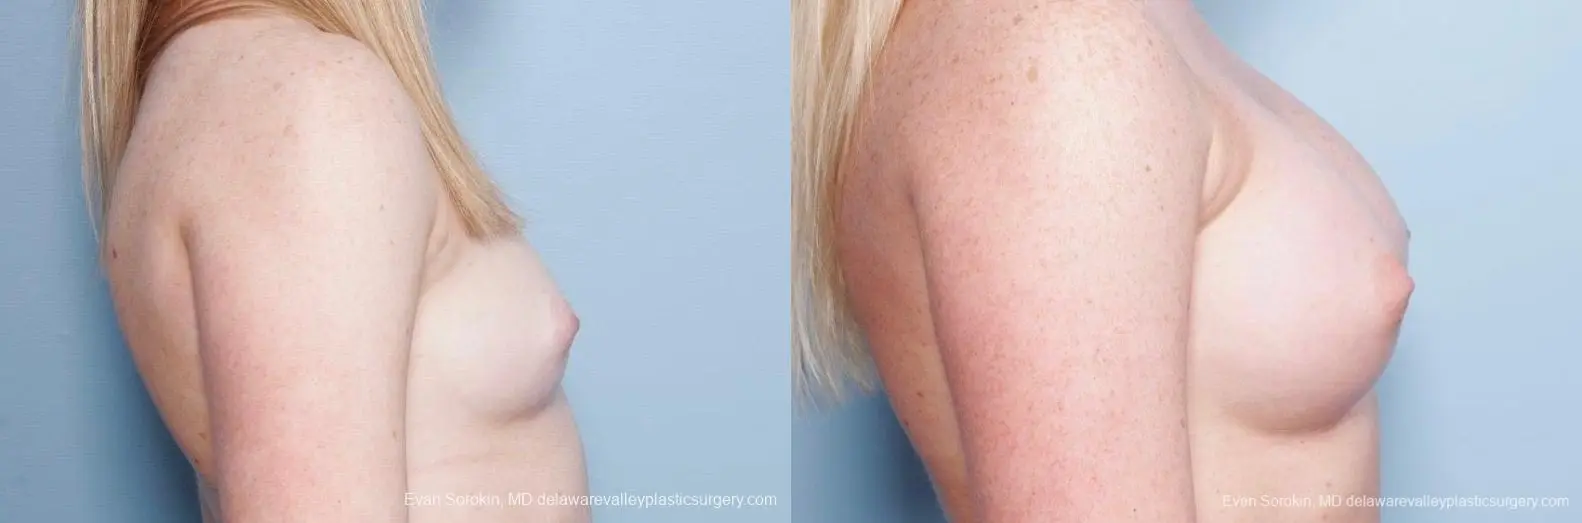 Philadelphia Breast Augmentation 8778 - Before and After 4